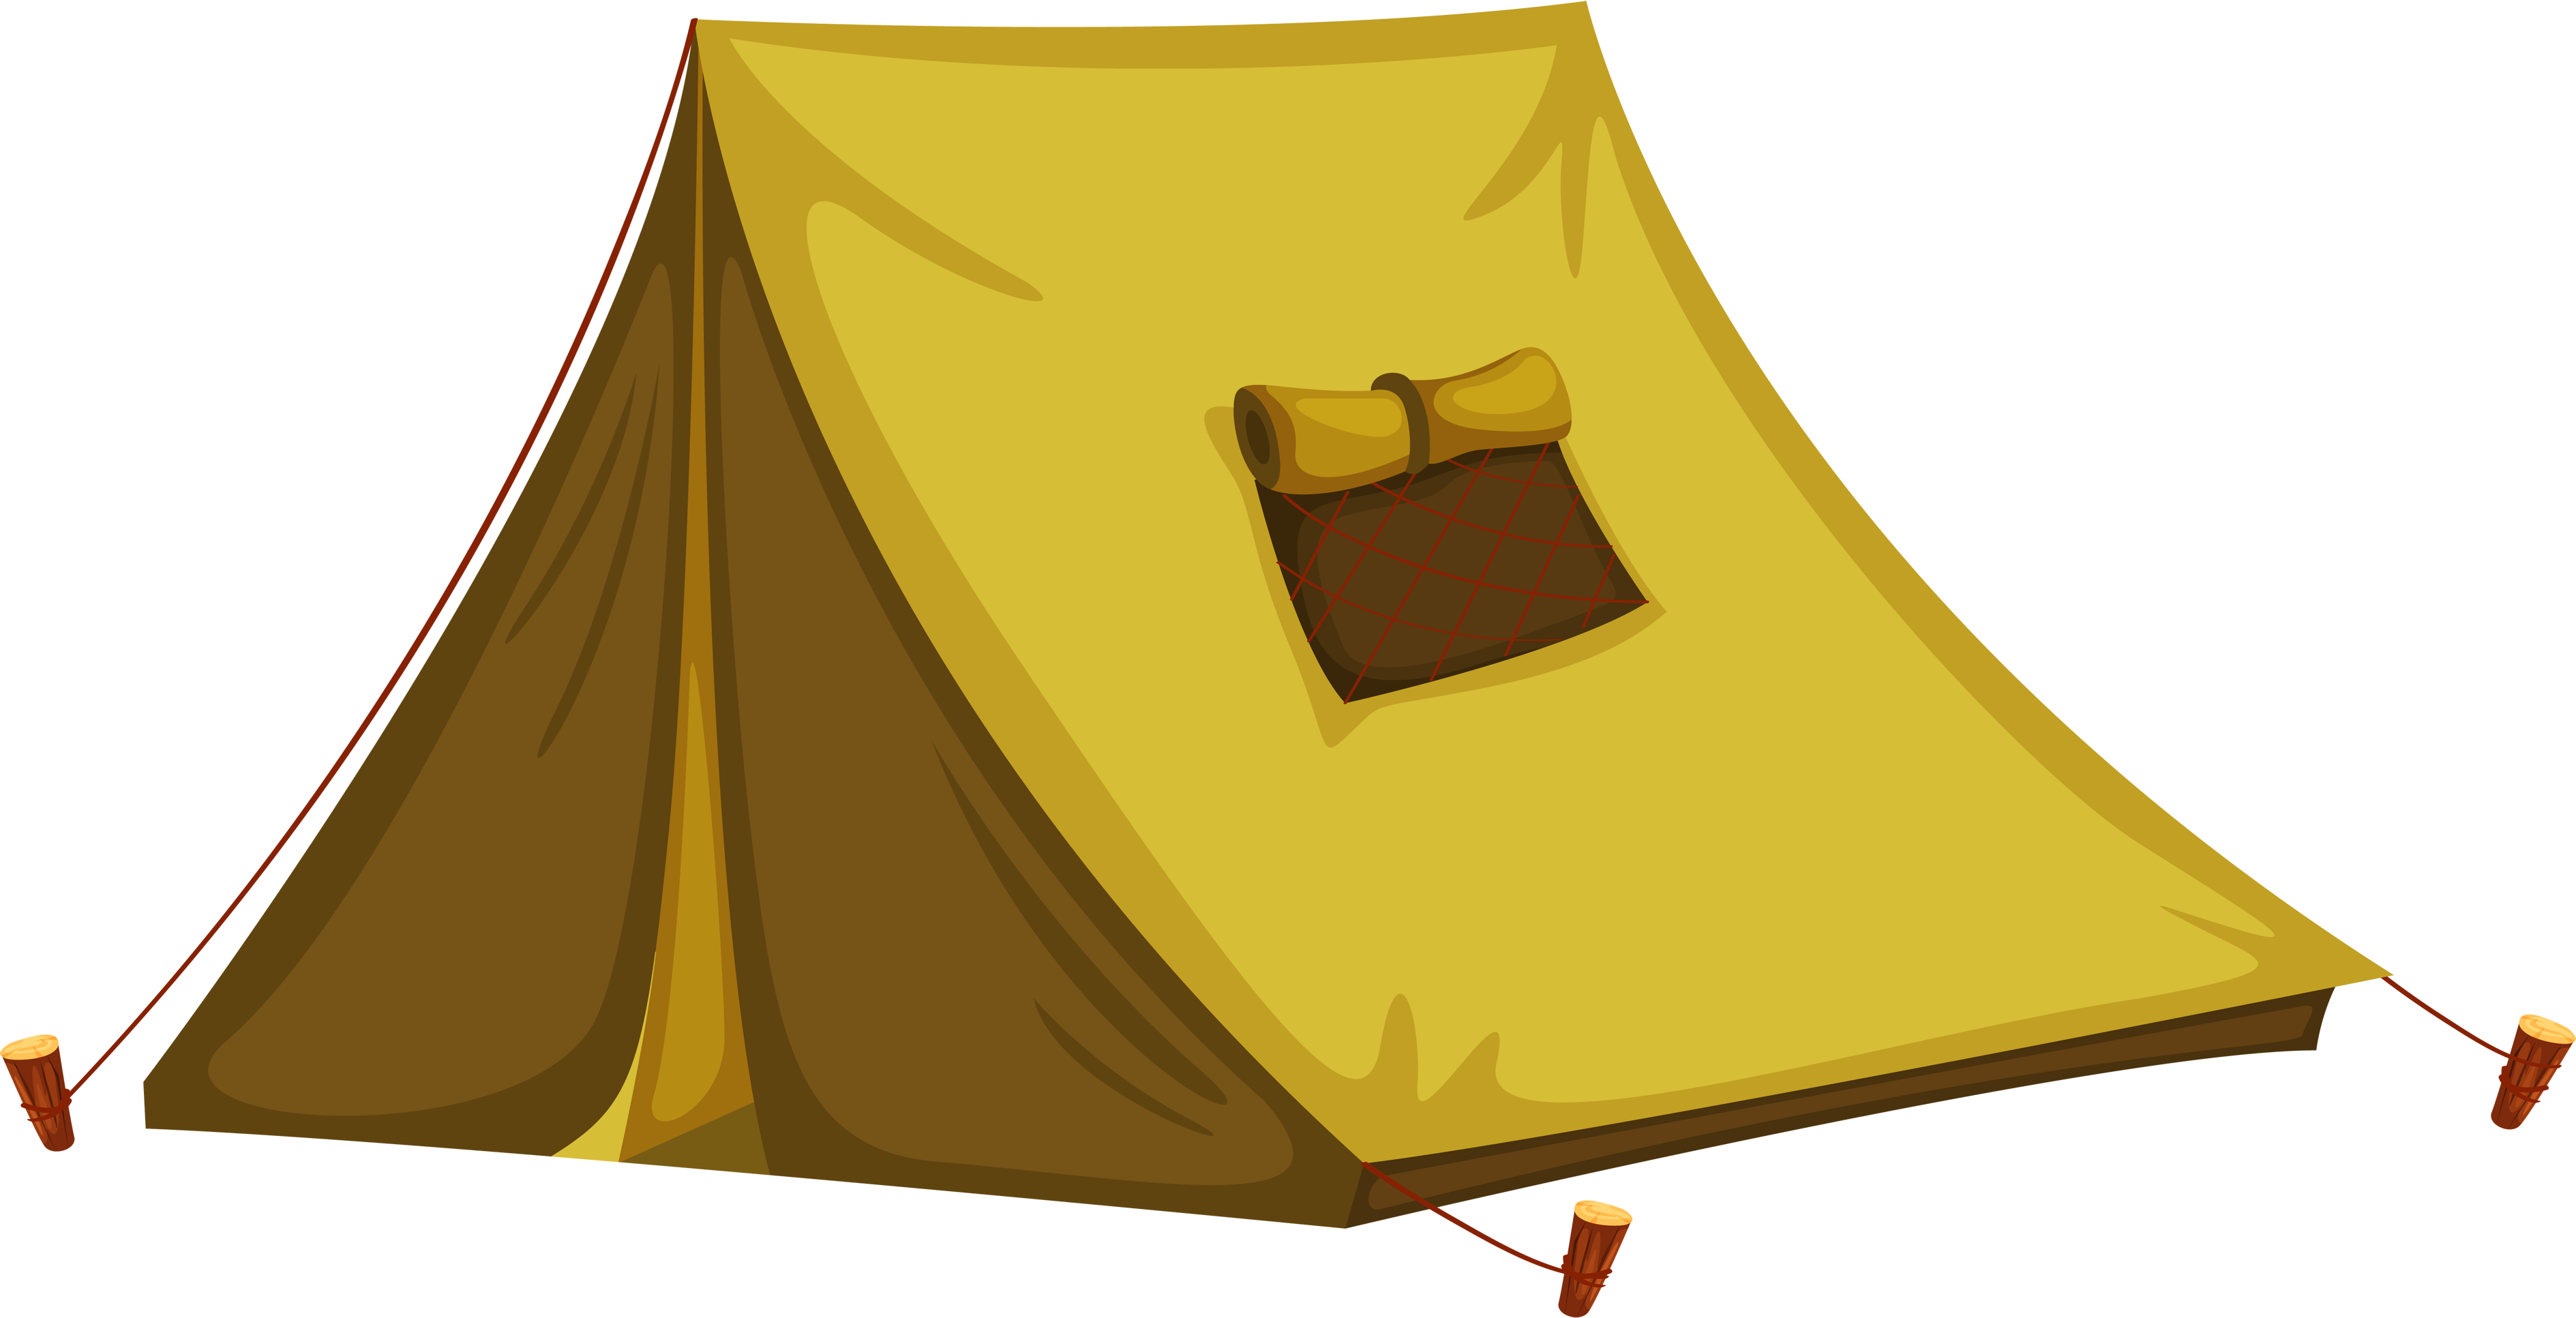 Camping Tent PNG Pic